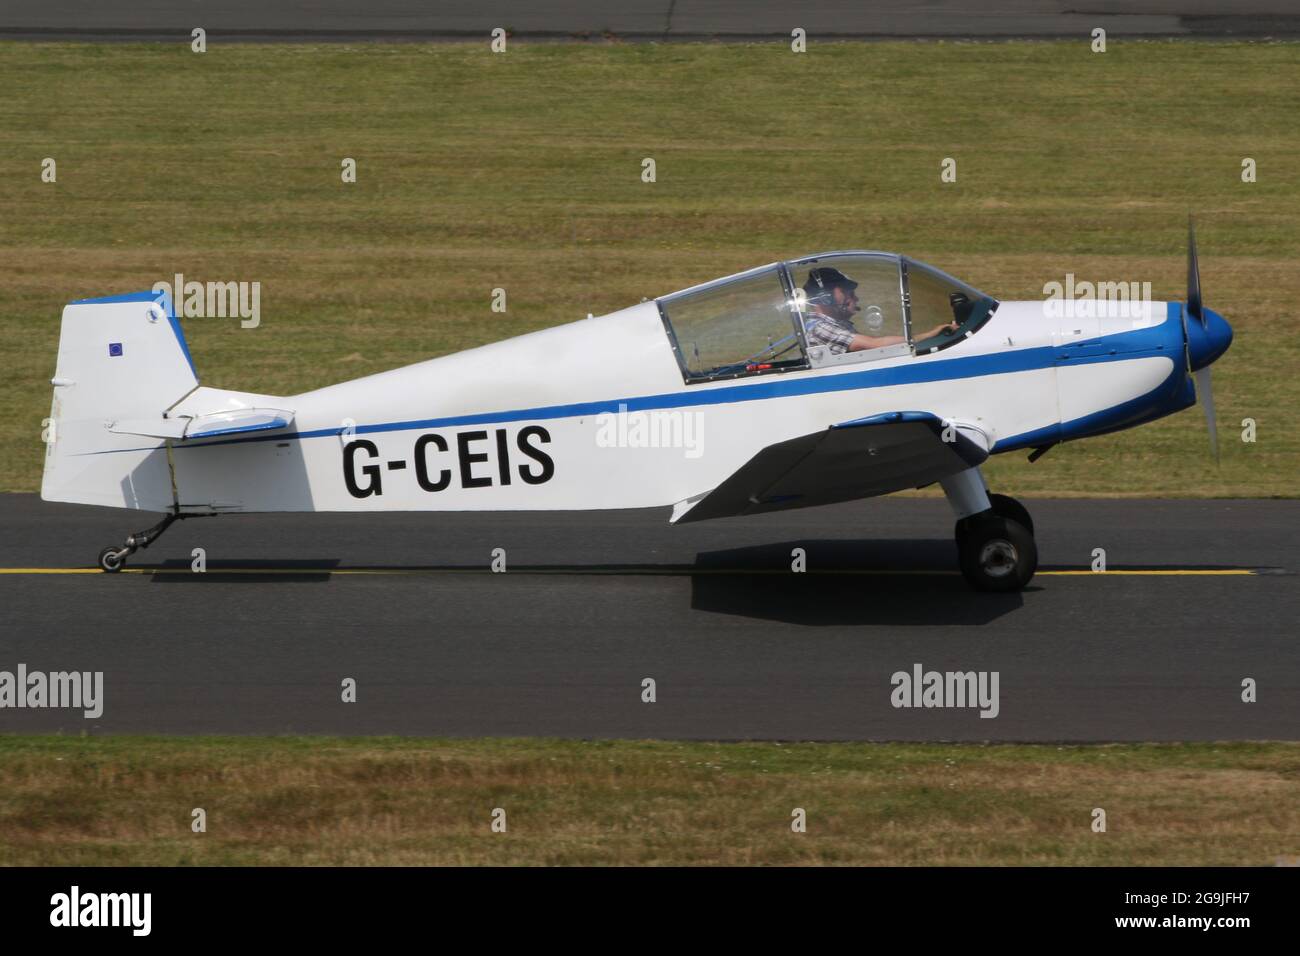 G-CEIS, a privately owned Jodel DR.1050 Ambassadeur, at Prestwick International Airport in Ayrshire, Scotland. Stock Photo